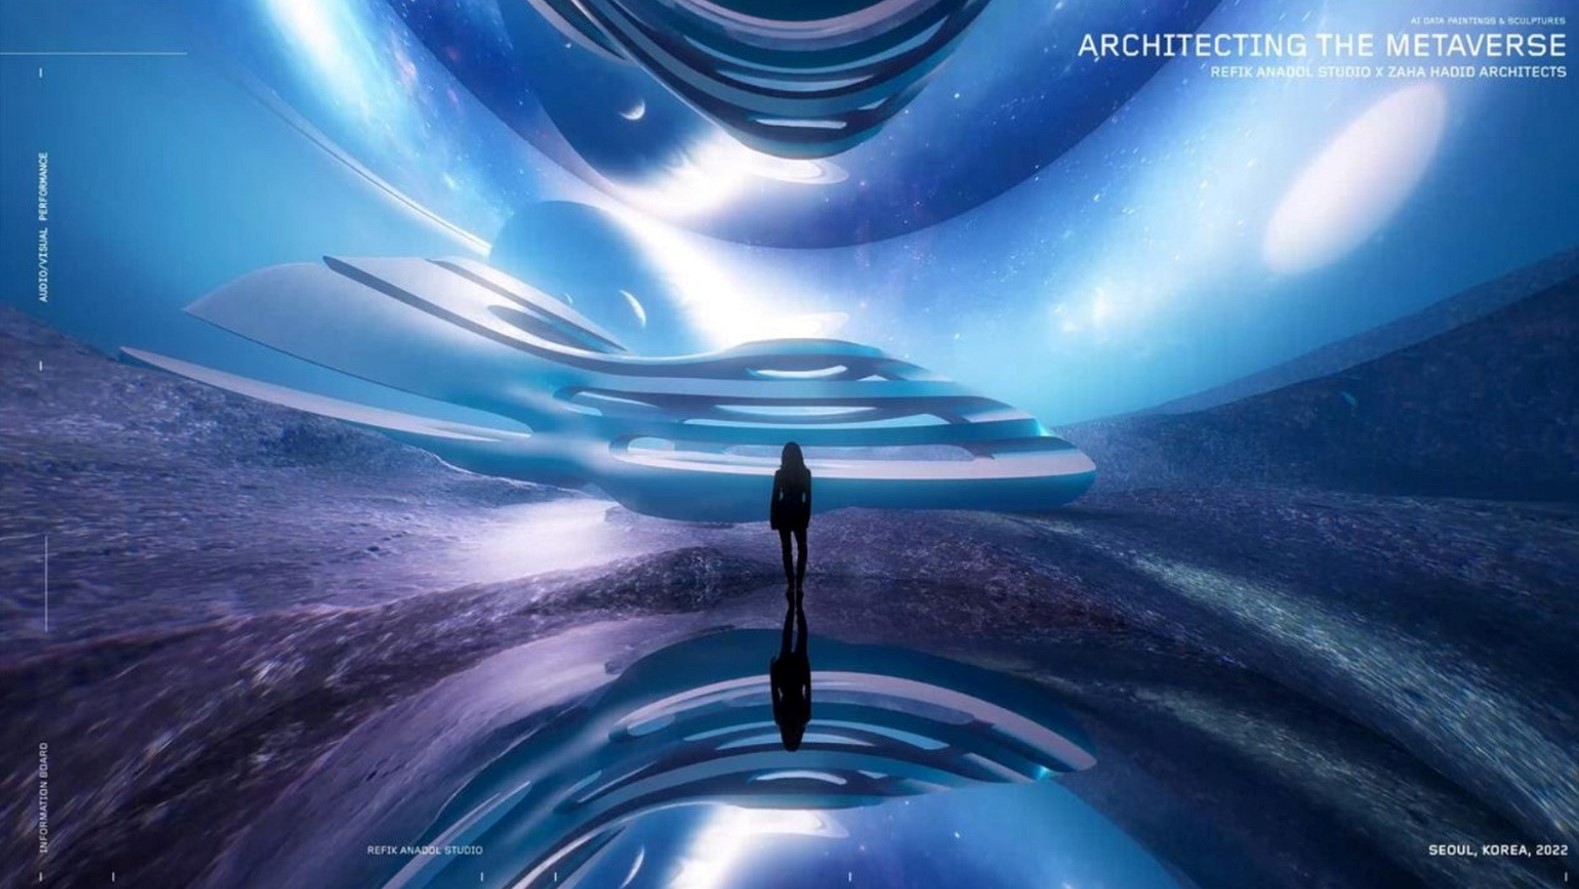 Architecting the metaverse: A collab between ZHA and Refik Anadol_©archdaily.com